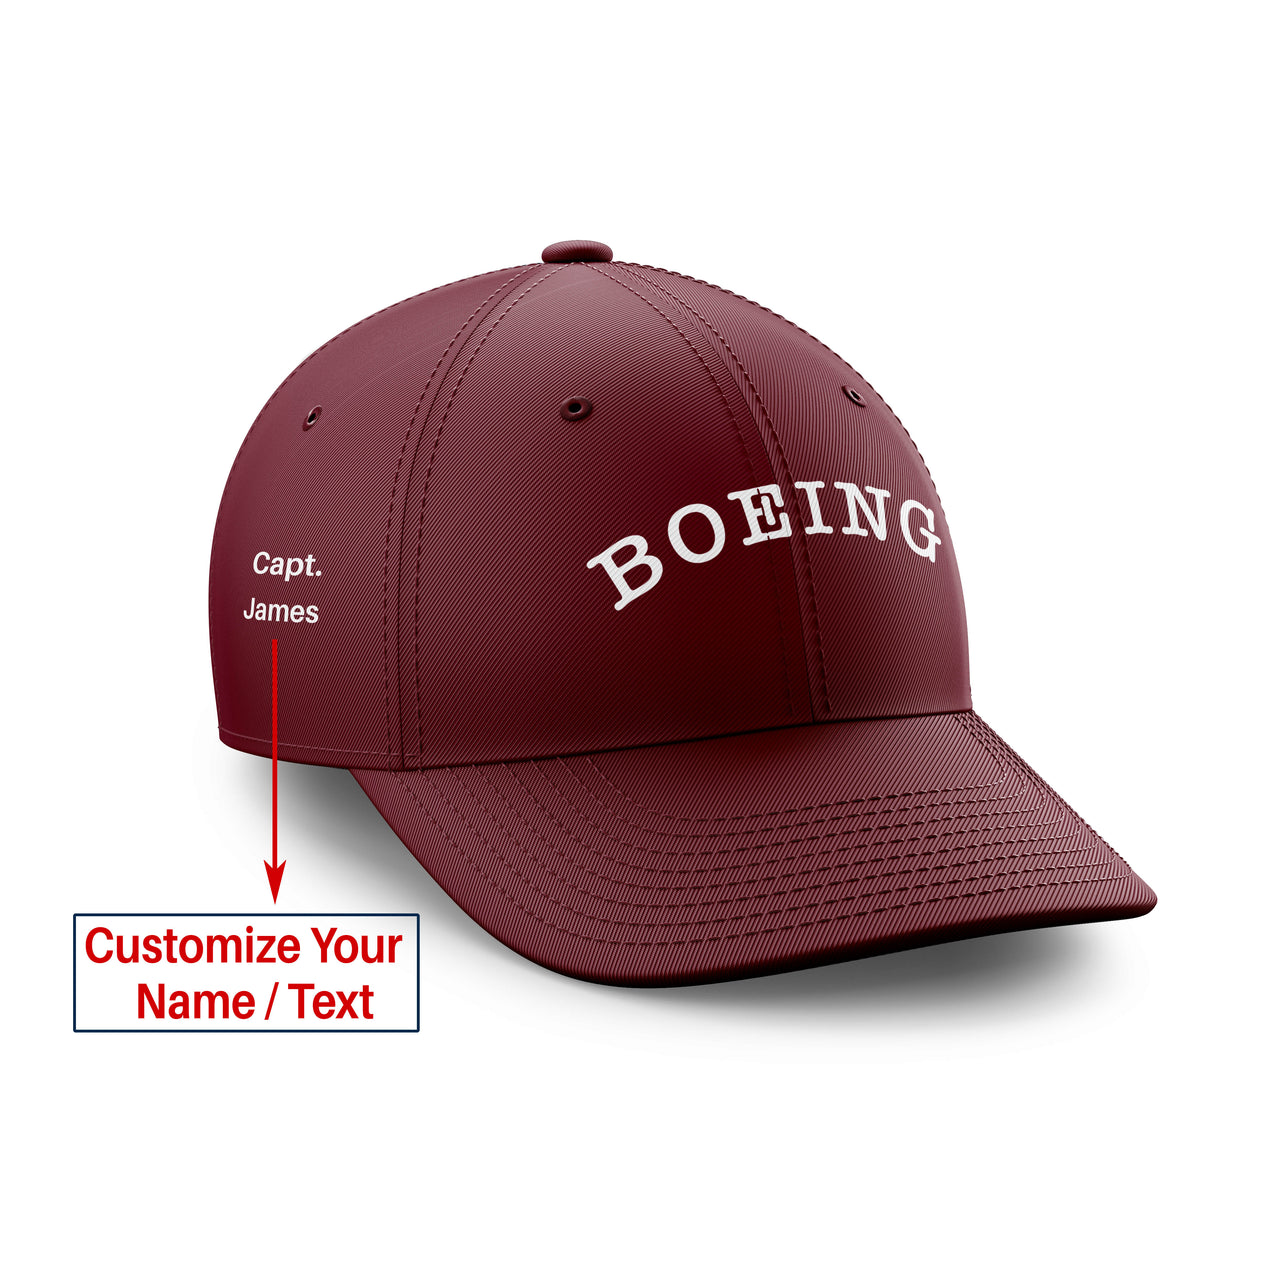 Special Boeing Text Designed Embroidered Hats